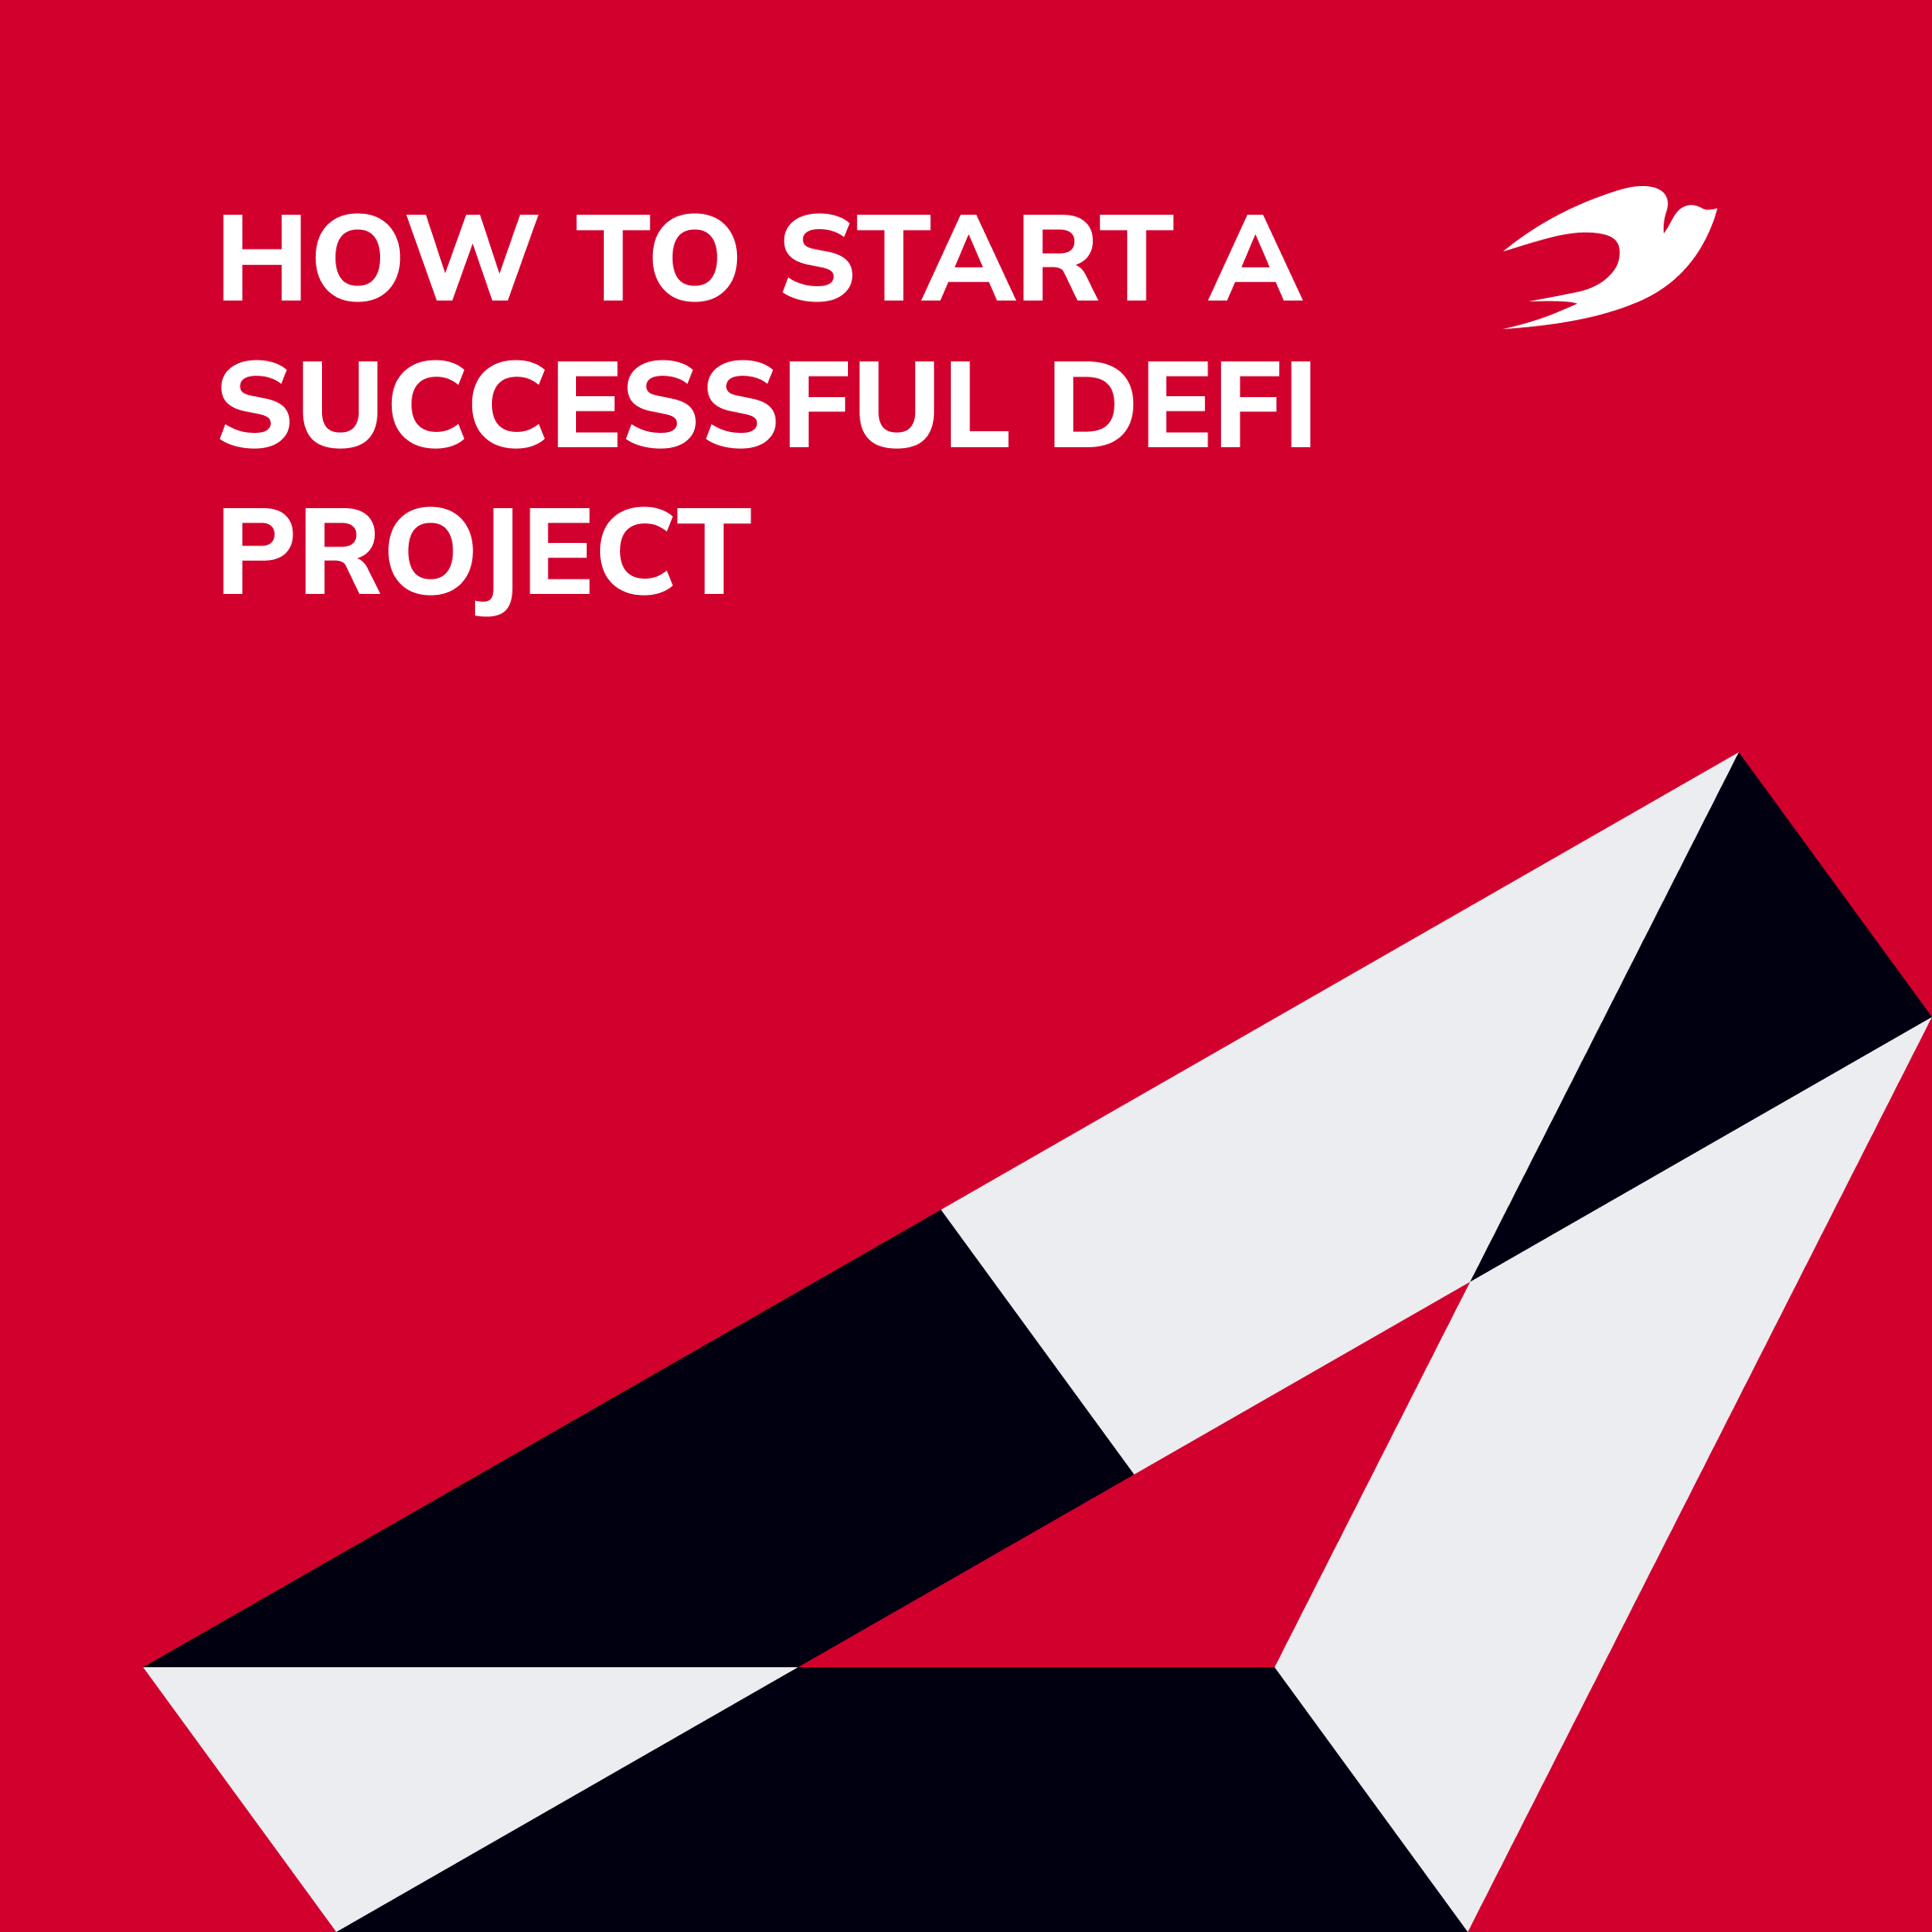 How to start a successful DeFi project